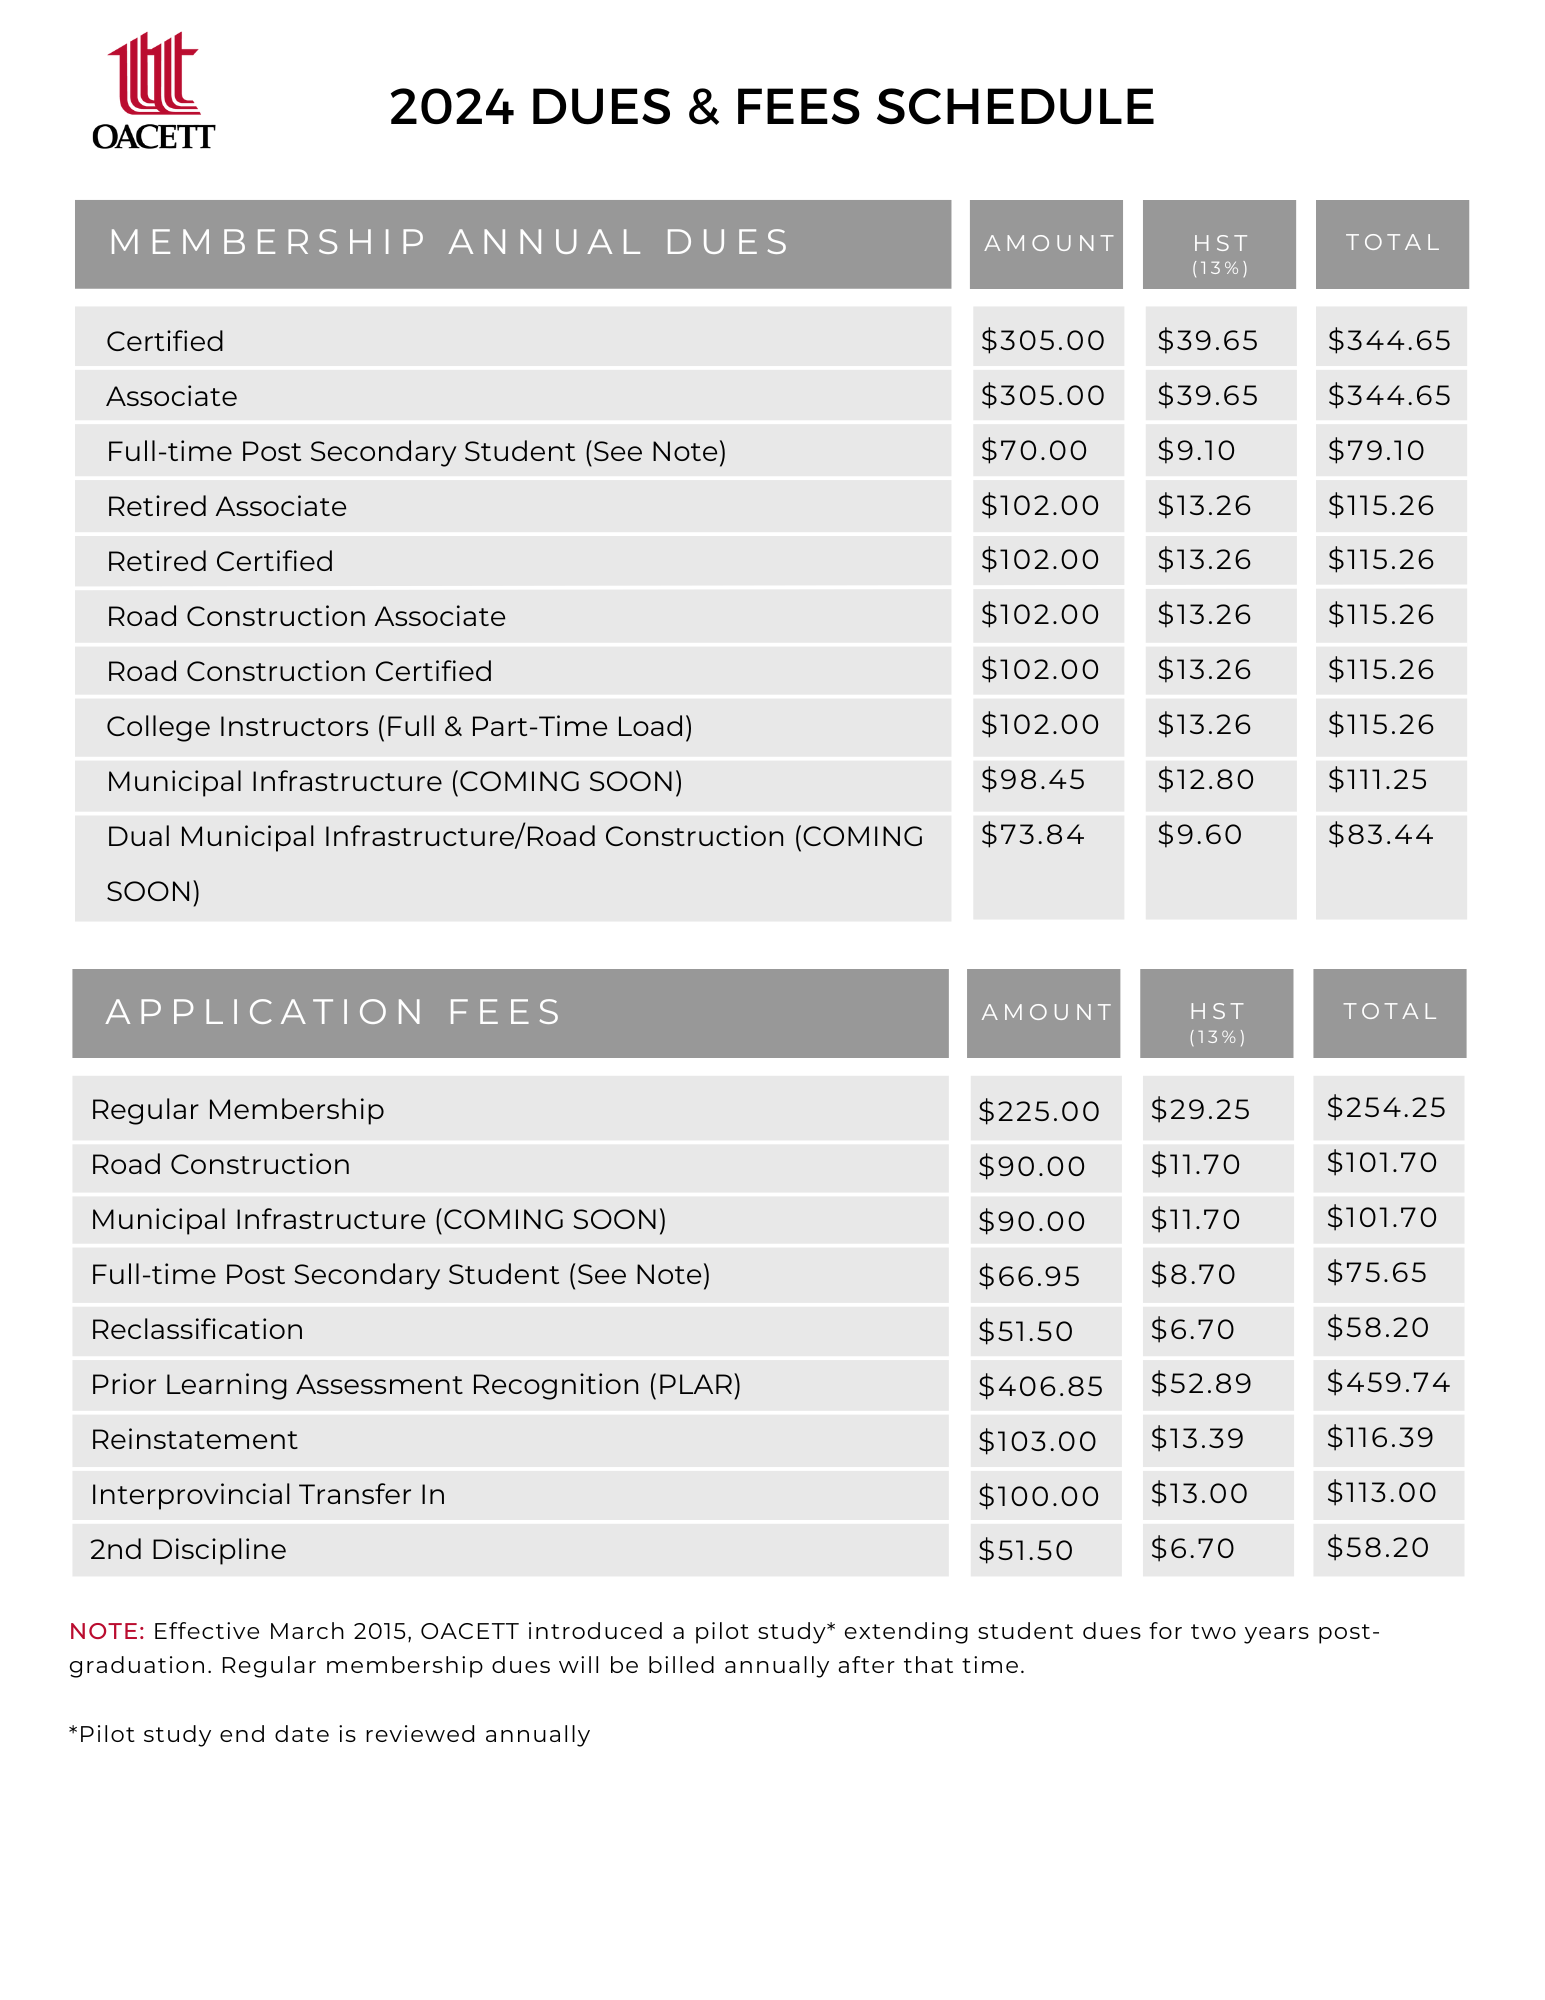 2023 Dues and Fees Schedule Page 1/3